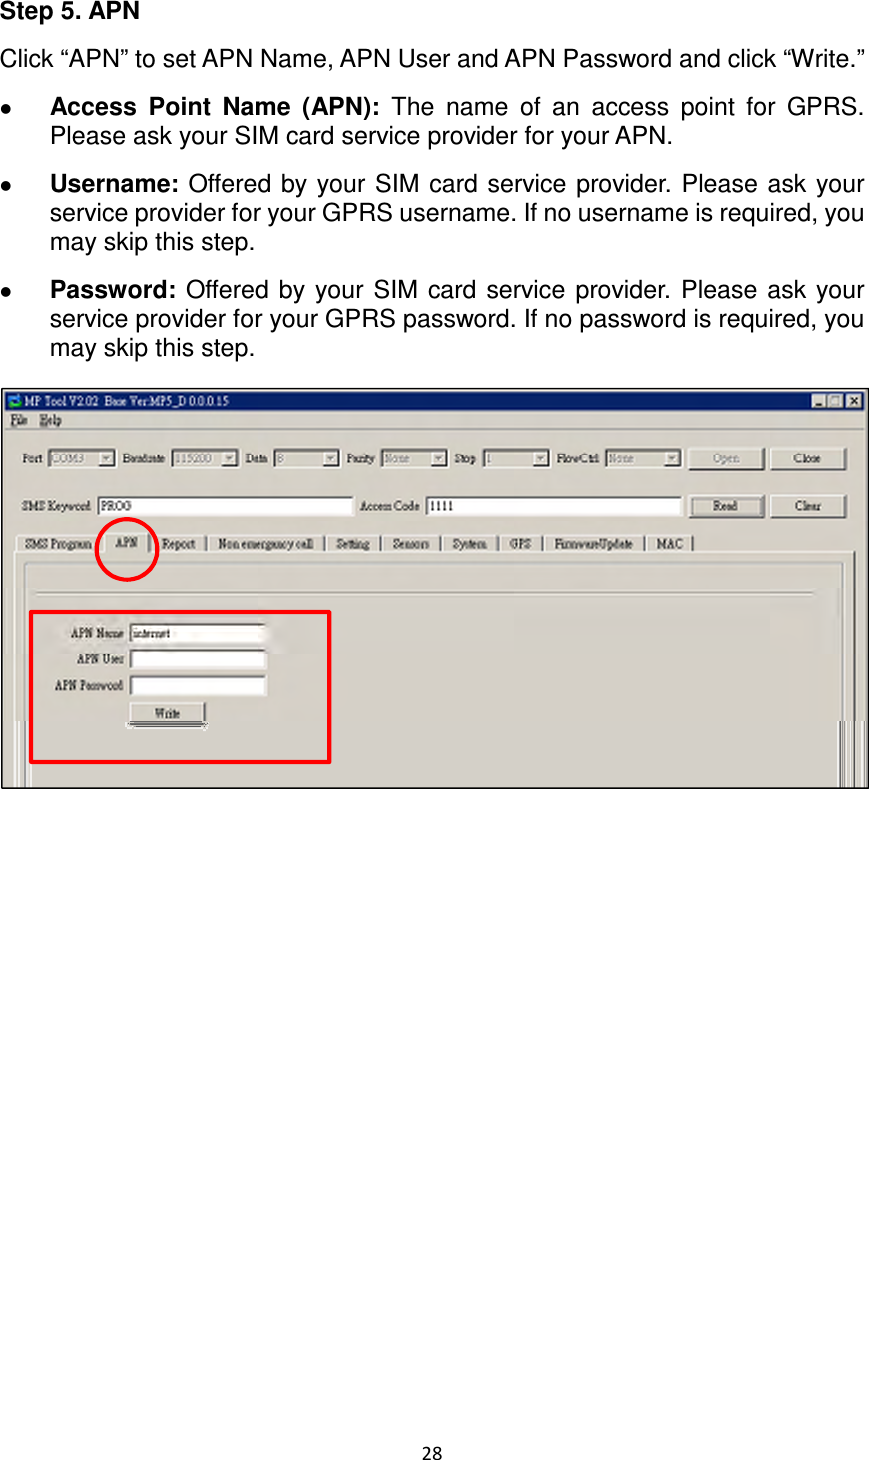 28  Step 5. APN Click “APN” to set APN Name, APN User and APN Password and click “Write.”    Access  Point  Name  (APN):  The  name  of  an  access  point  for  GPRS. Please ask your SIM card service provider for your APN.    Username: Offered by your SIM  card service provider.  Please ask your service provider for your GPRS username. If no username is required, you may skip this step.  Password:  Offered by your  SIM  card  service  provider.  Please  ask  your service provider for your GPRS password. If no password is required, you may skip this step.                 